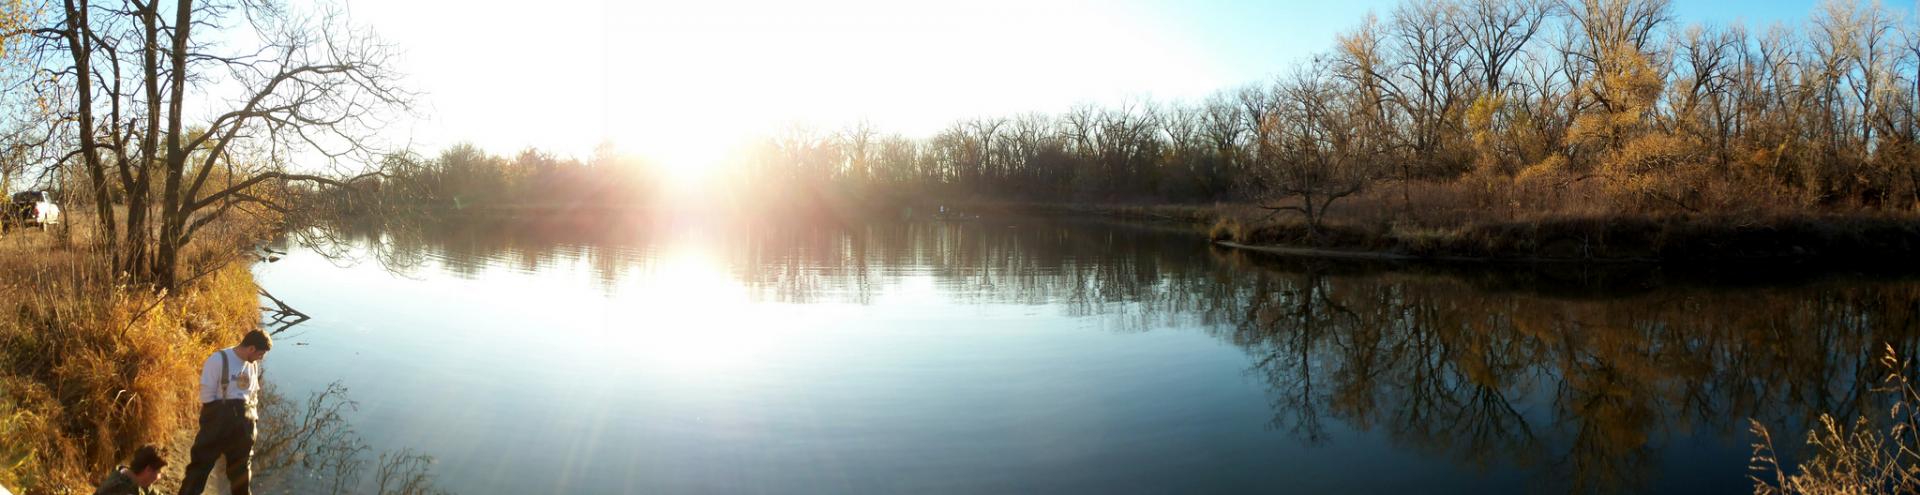 Peaceful sunset on a backwaters area of the Platte River near Ashland, Nebraska during during the fall of 2011